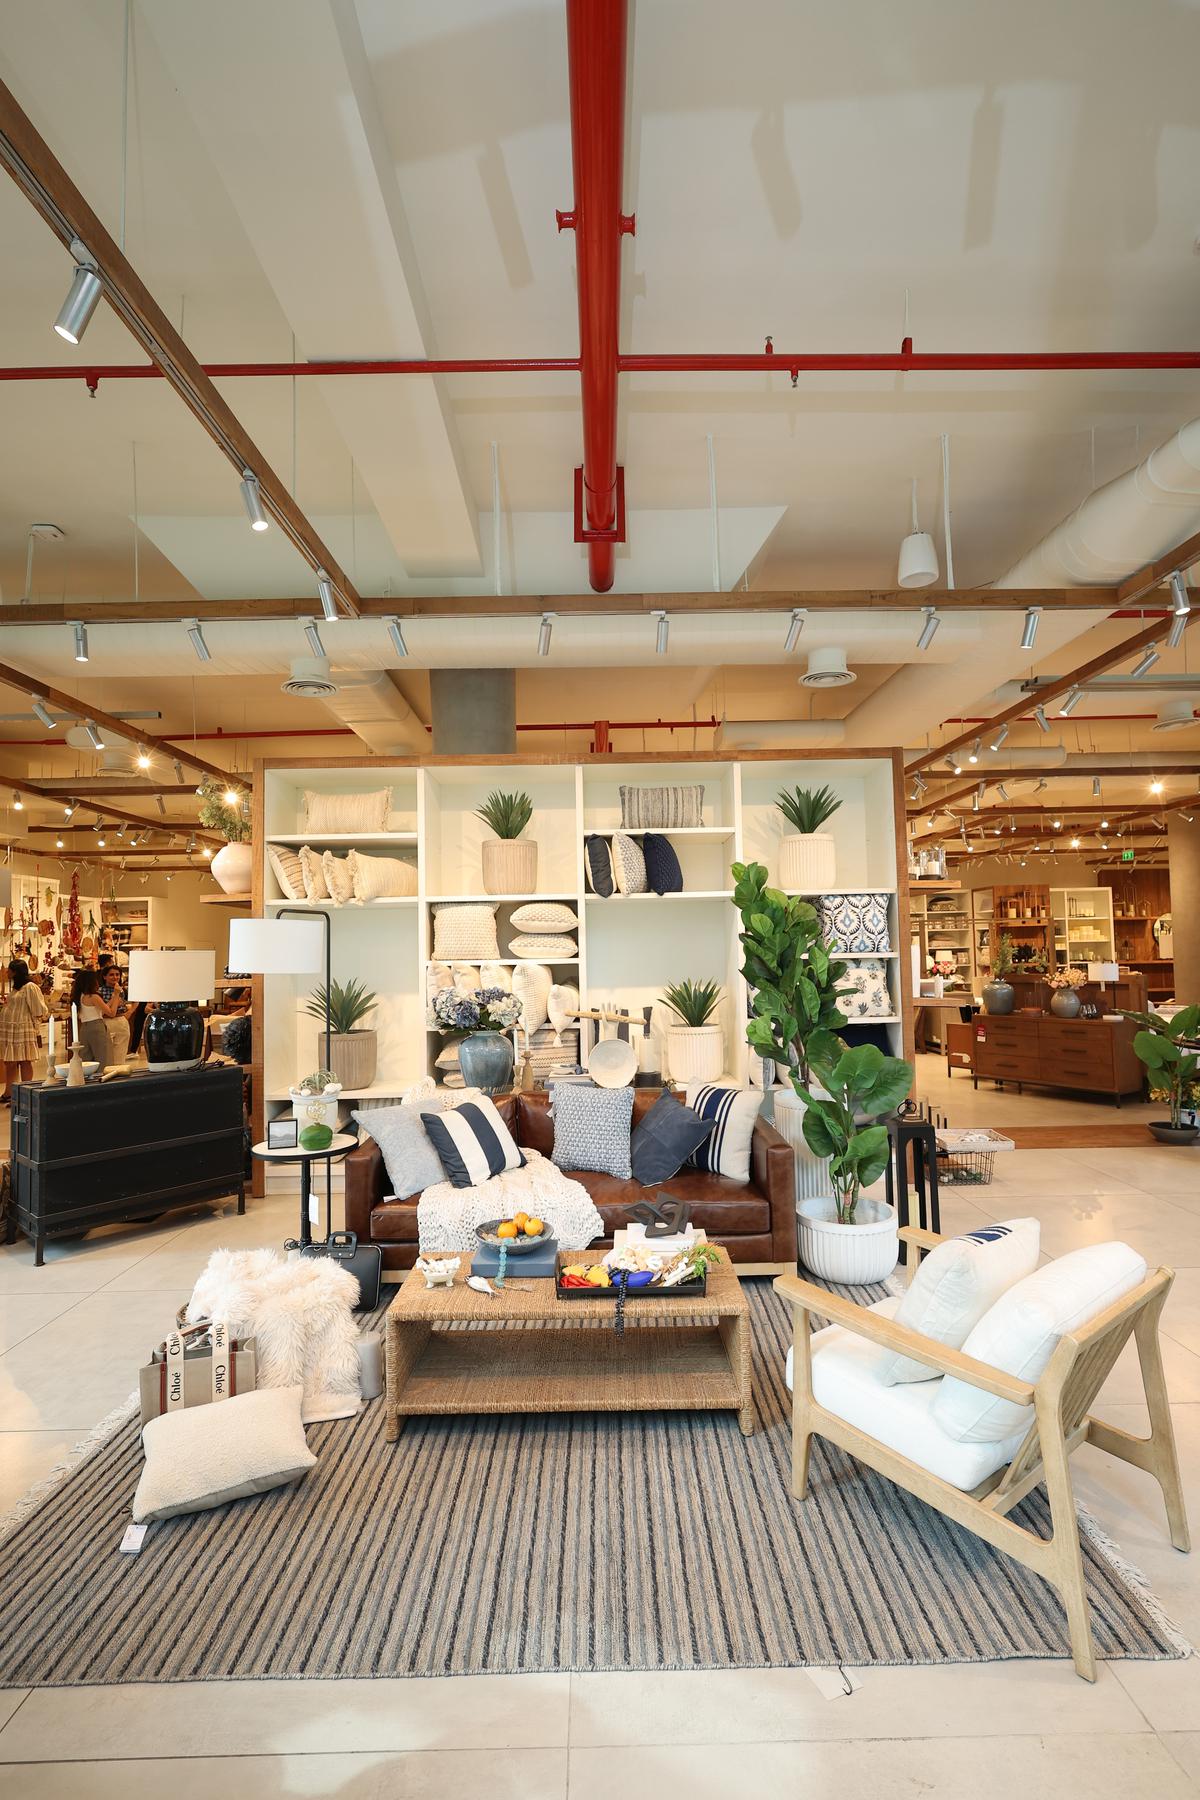 Global design home retailer West Elm launches in India